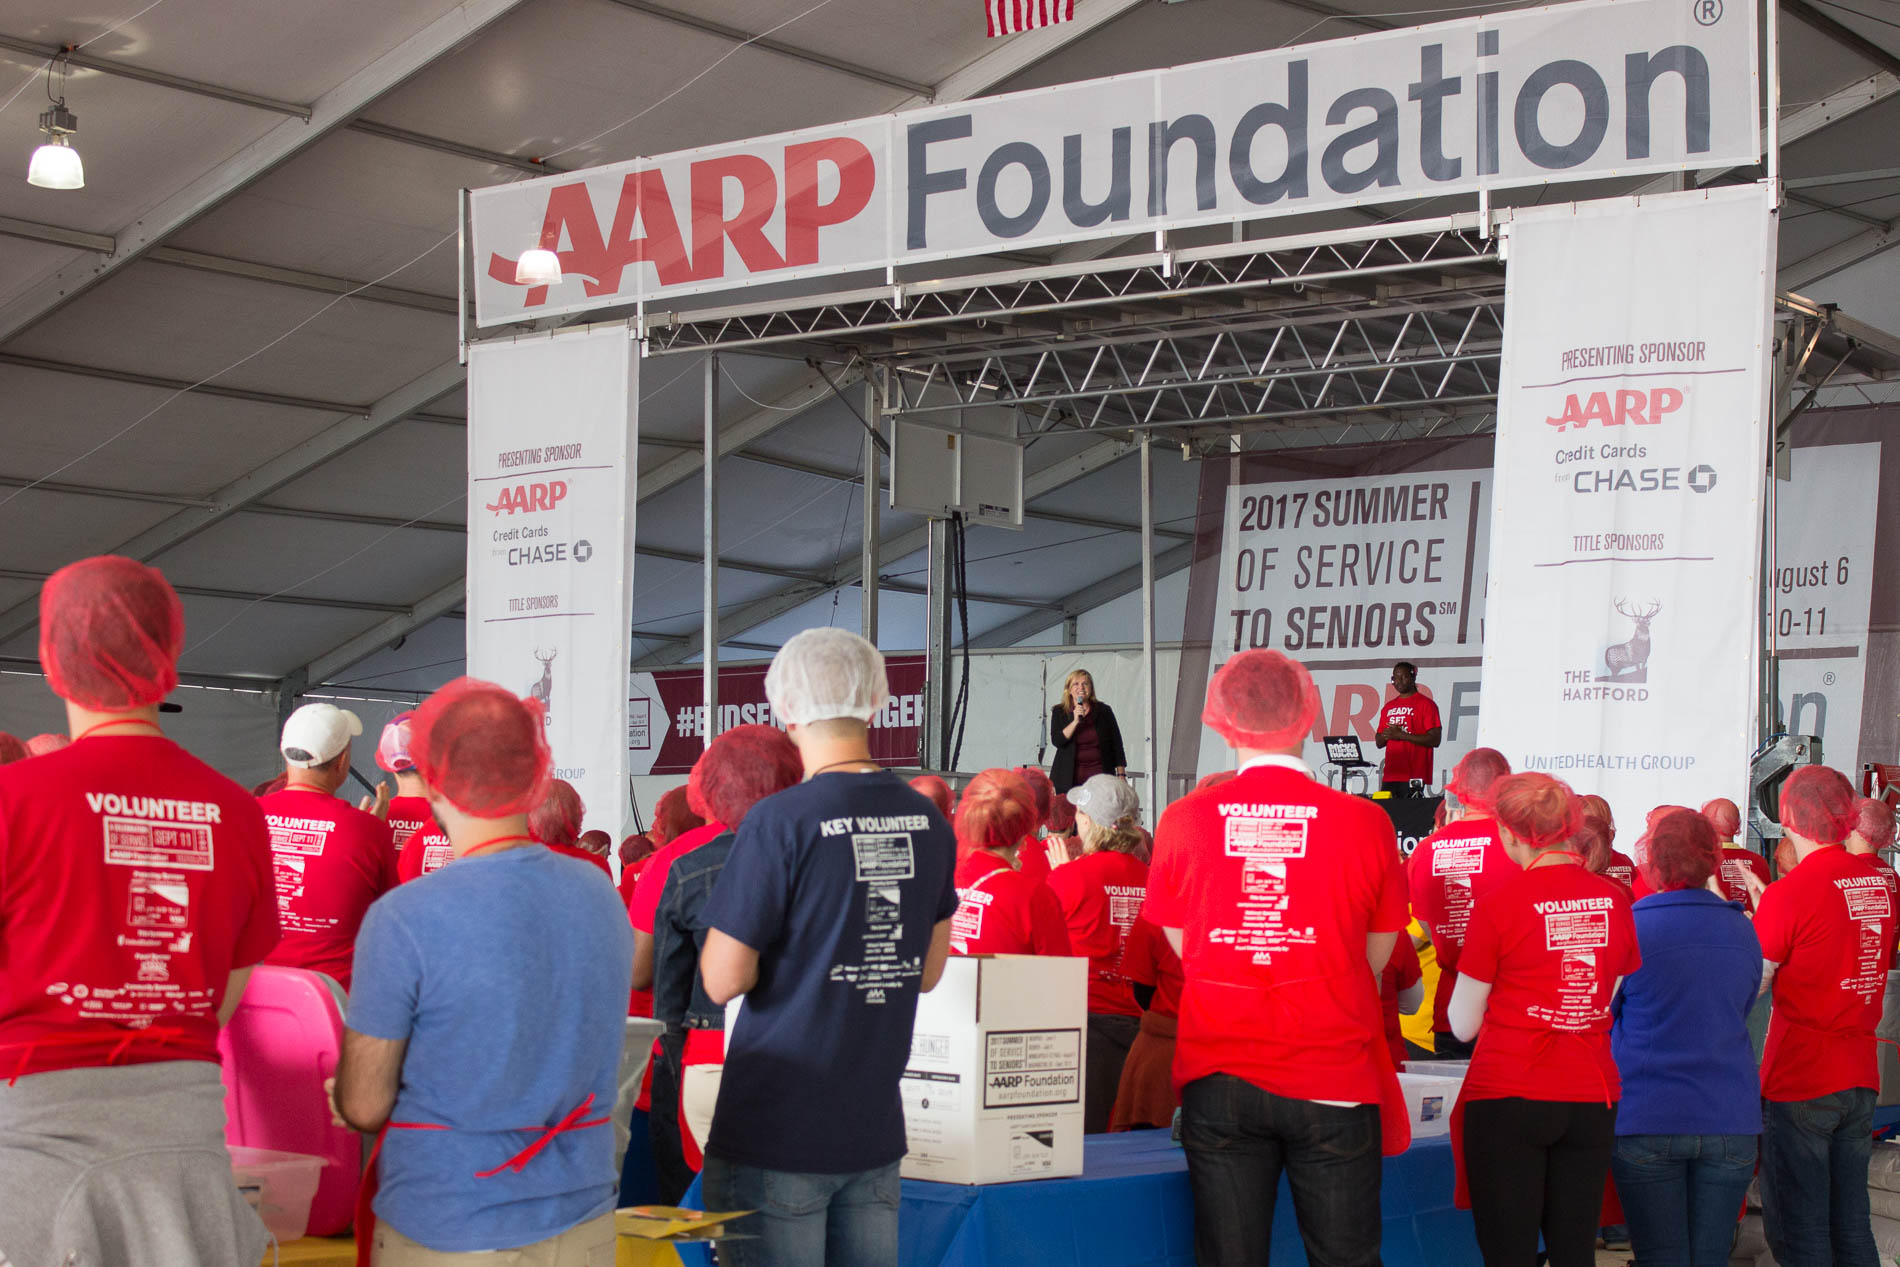 The Drive to End Hunger with the AARP Credit Card from Chase | Something Good, AARP Credit Card from Chase